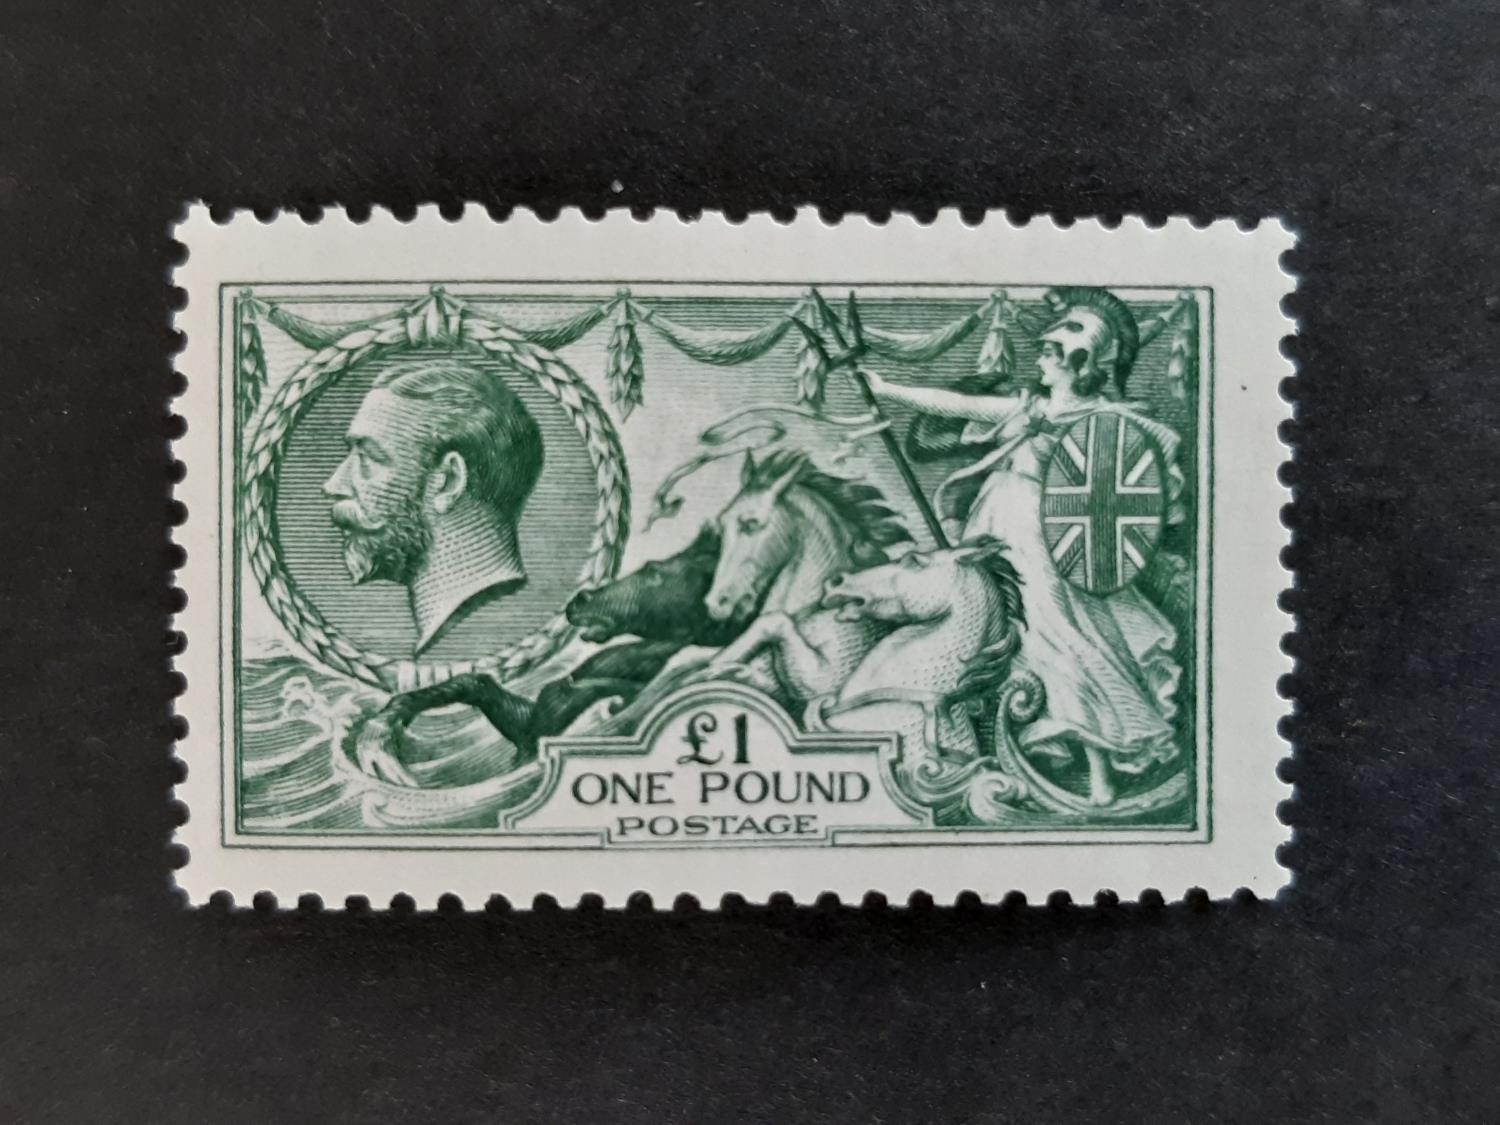 1913 KGV £1 green Seahorse Waterlow printing. A beautiful VLMM example of this scarce stamp. Cat £